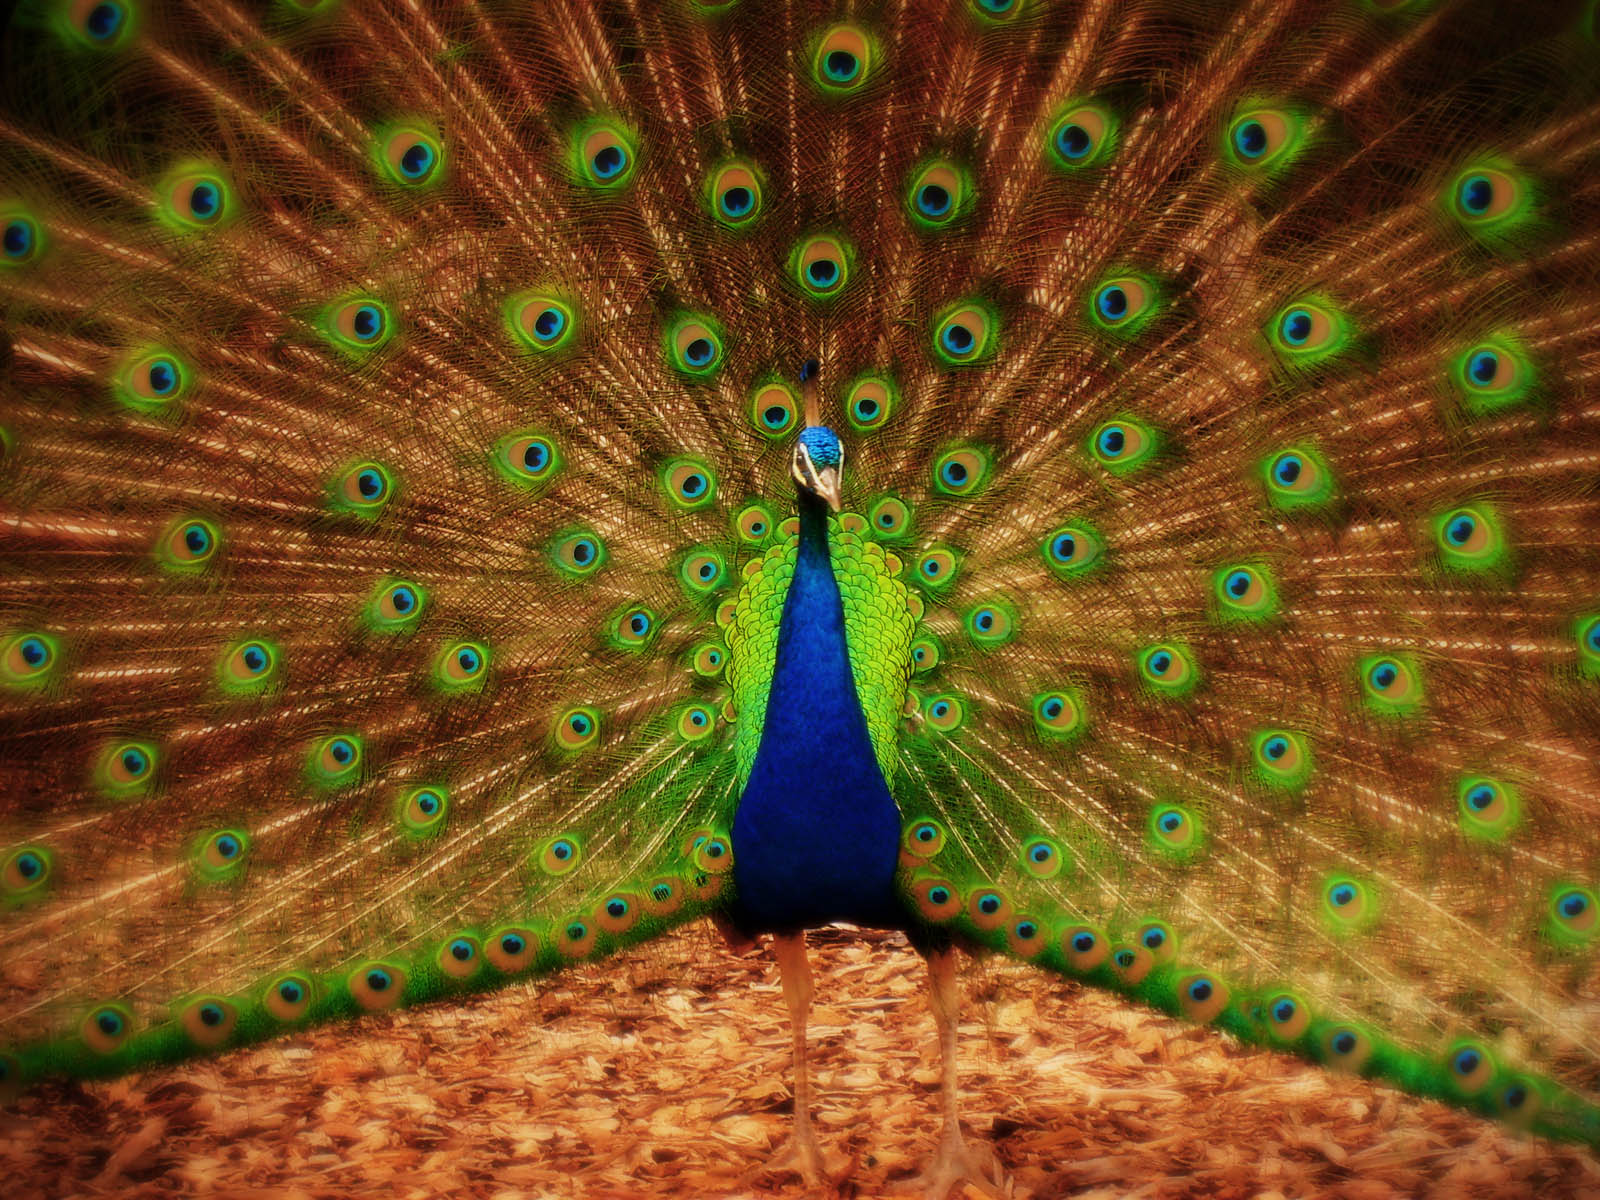 Tag Peacock Wallpaper Background Paos Image And Pictures For